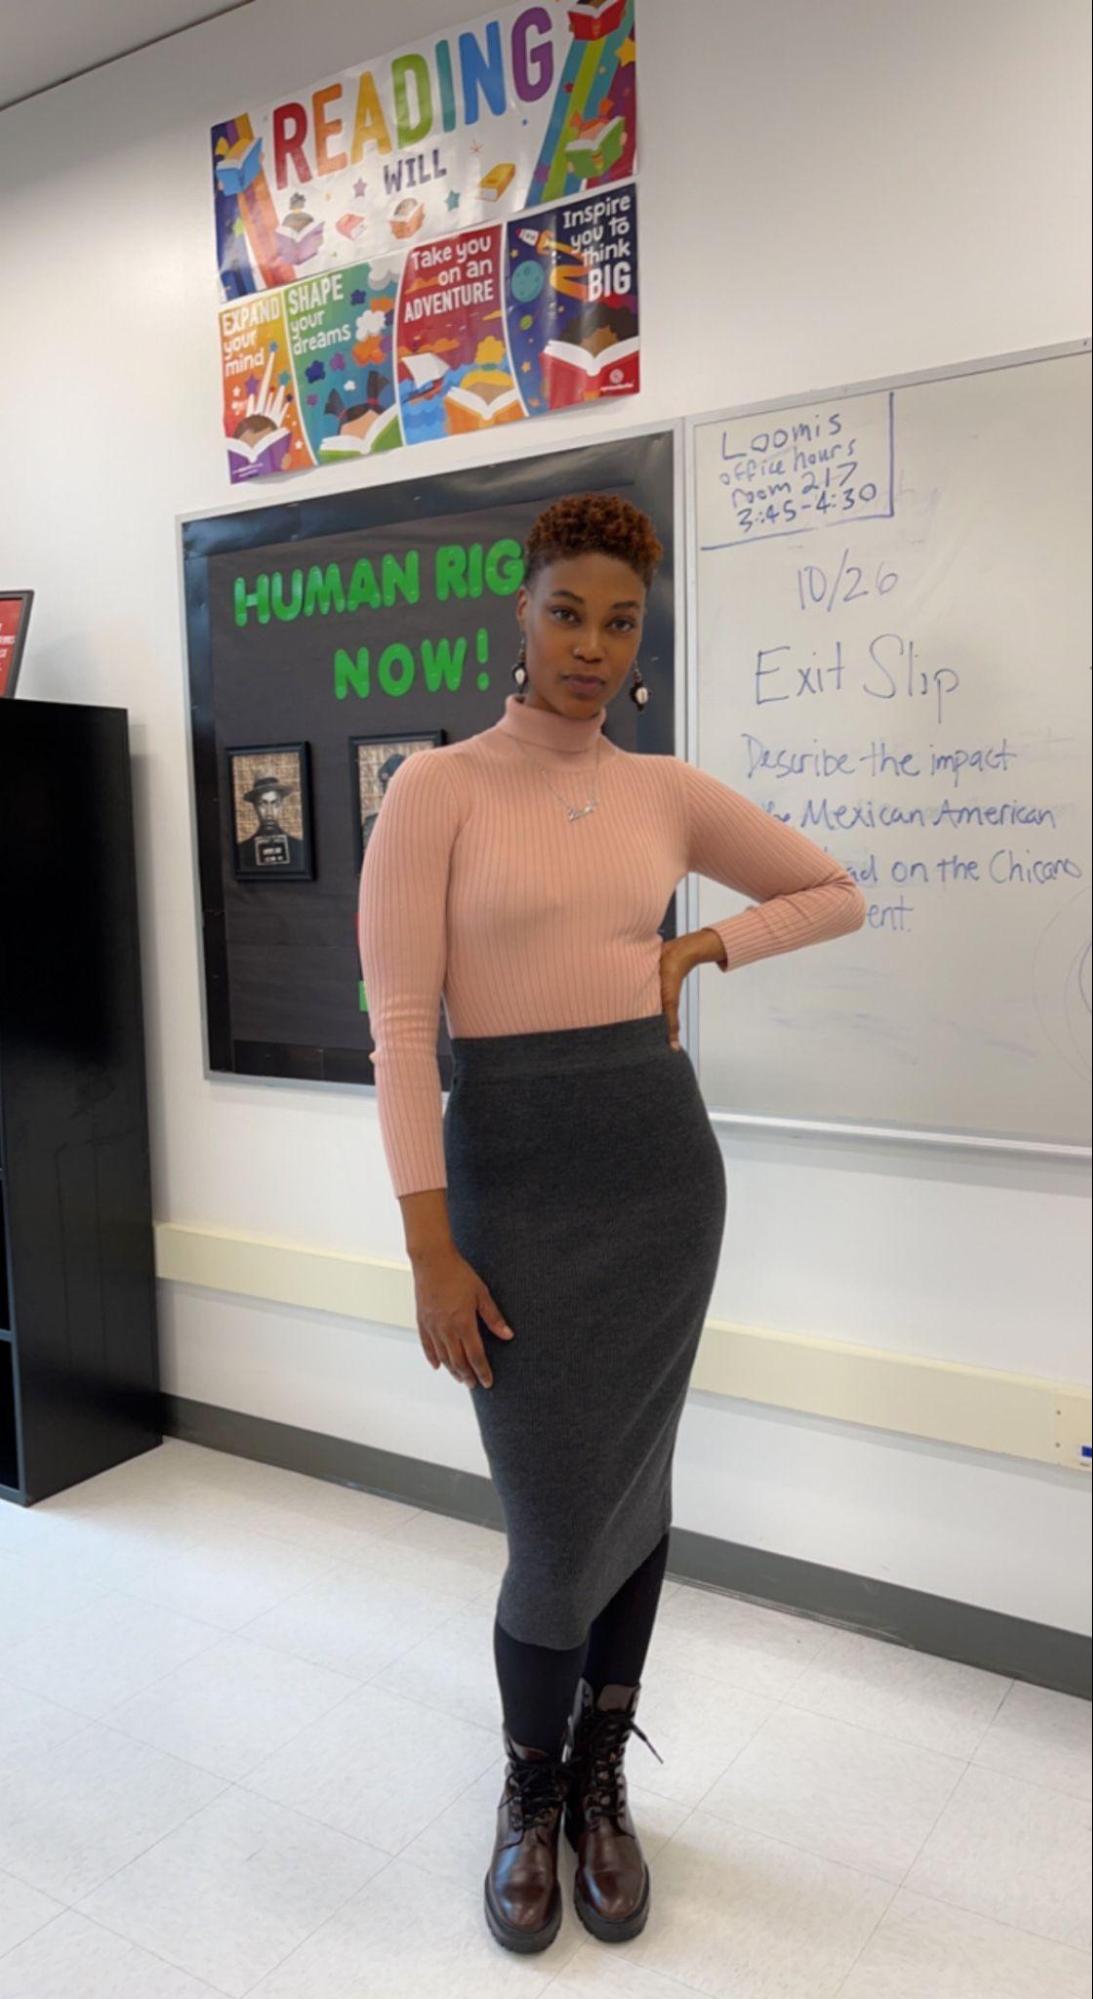 Ms. Emery is wearing a coral-pink turtleneck, long sleeved shirt. She wears a gray-ish long skirt with black leggings. She has her left hand on her hip as she poses for the photo.